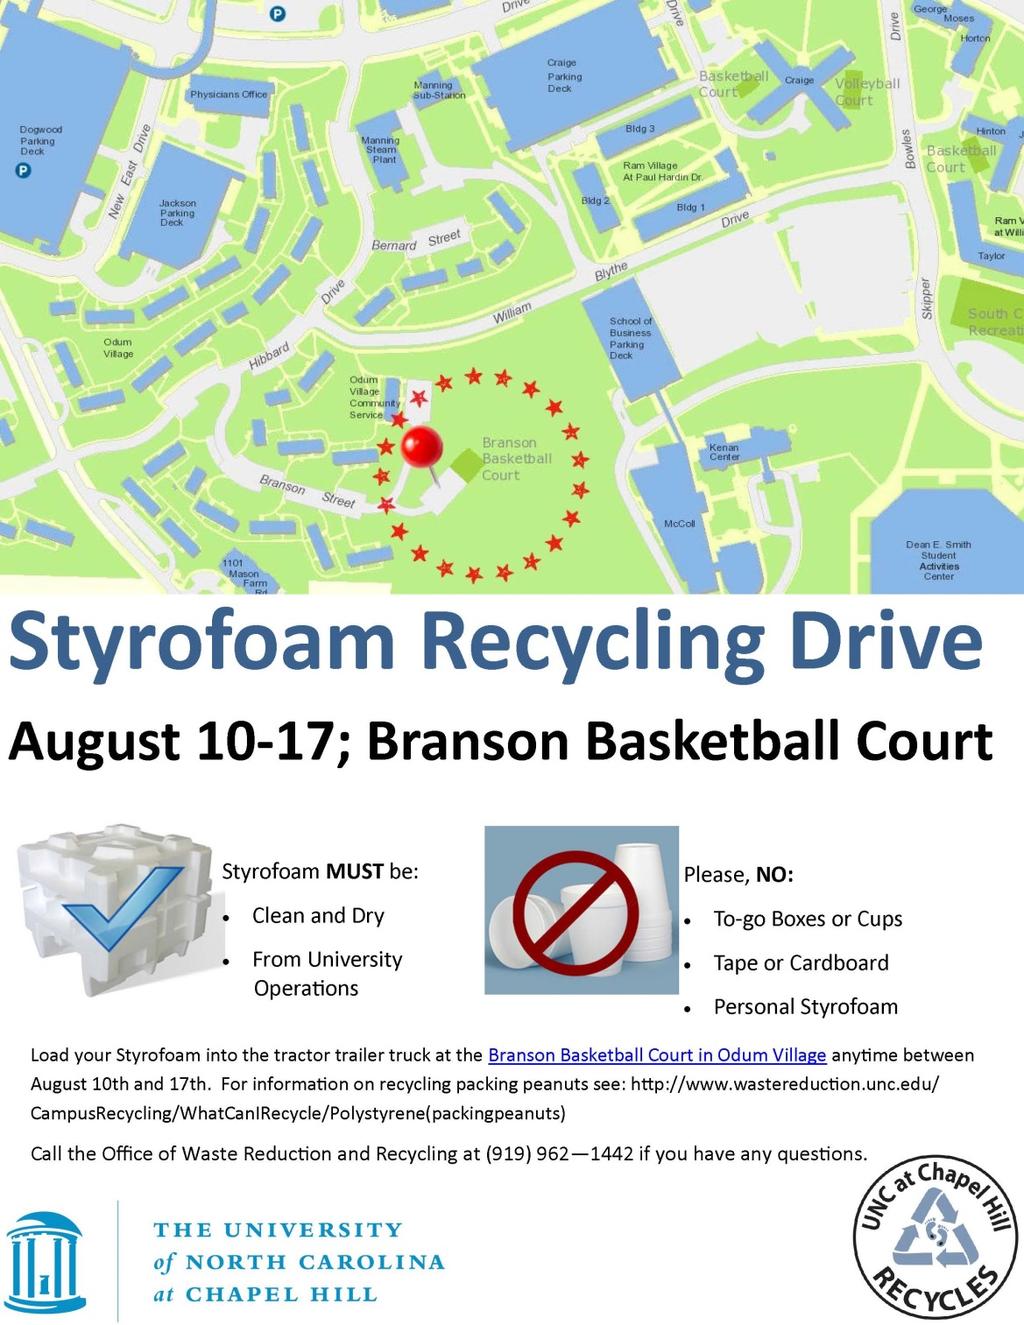 OWRR: Attention UNC Chapel Hill Students, Faculty and Staff! Do you have Styrofoam that you d hate to send to the landfill and would really love to recycle instead?